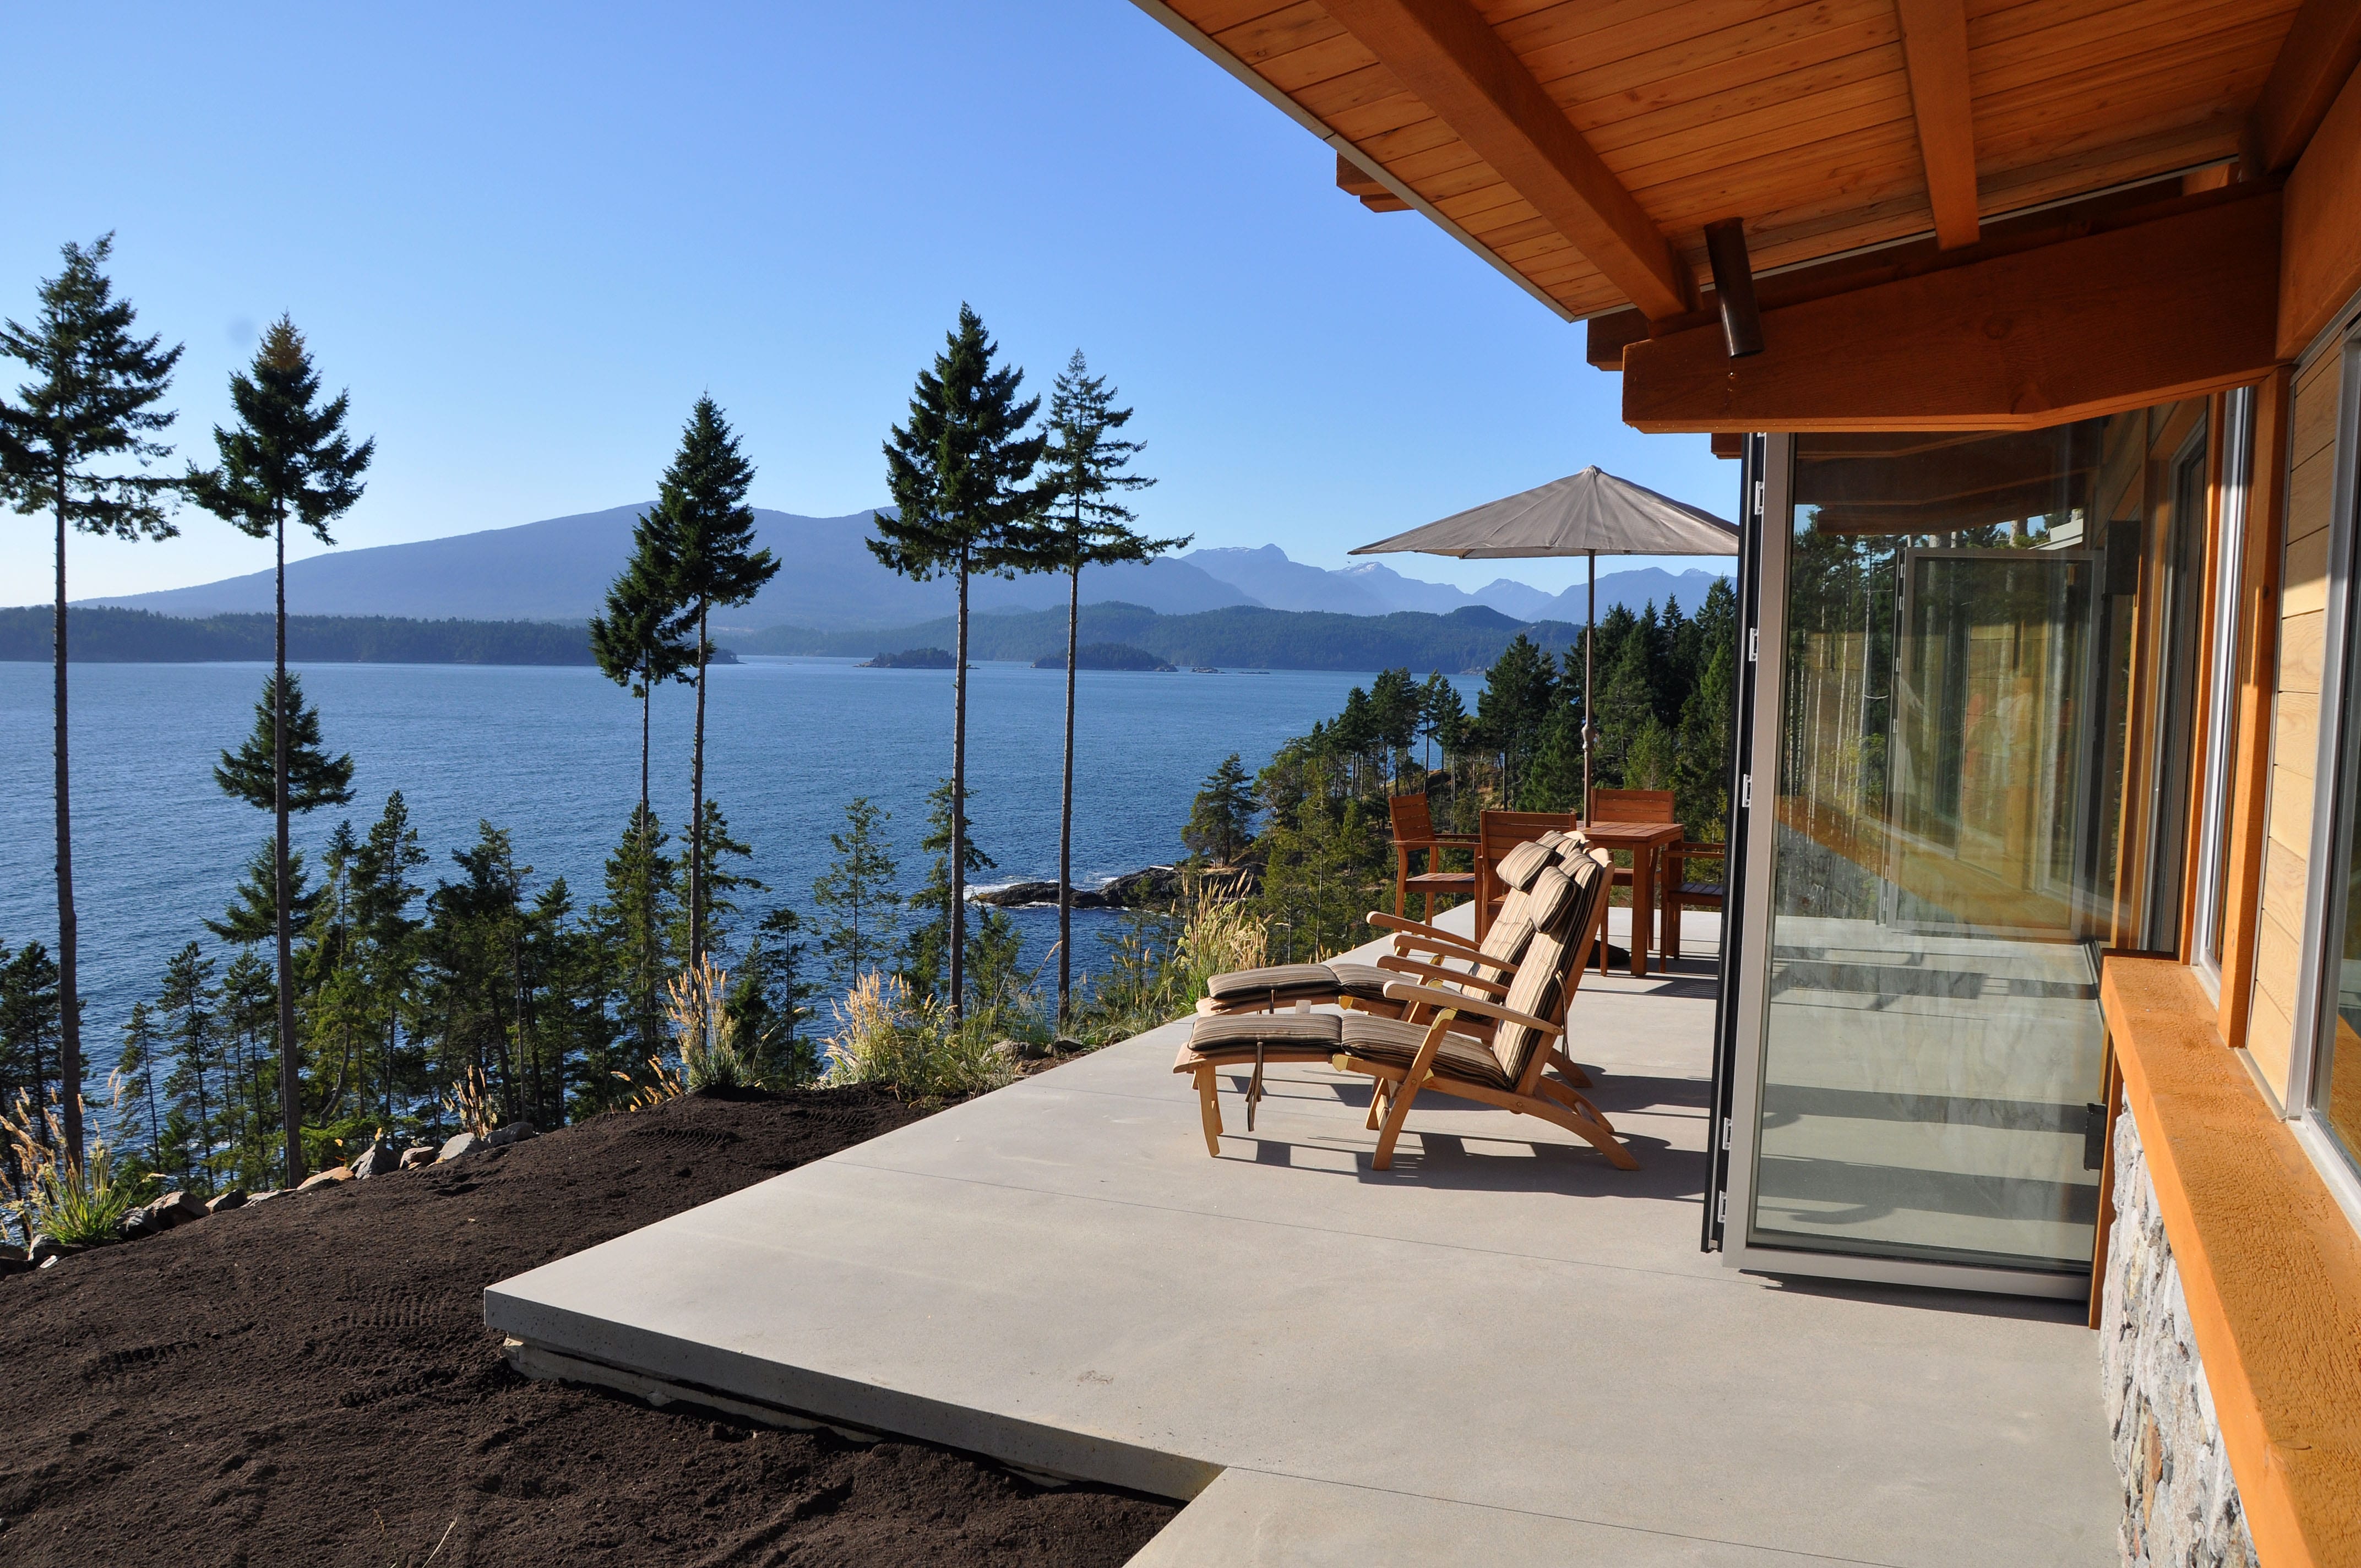 First Home Built At The Cape On Bowen Island Www Westvancouver Com